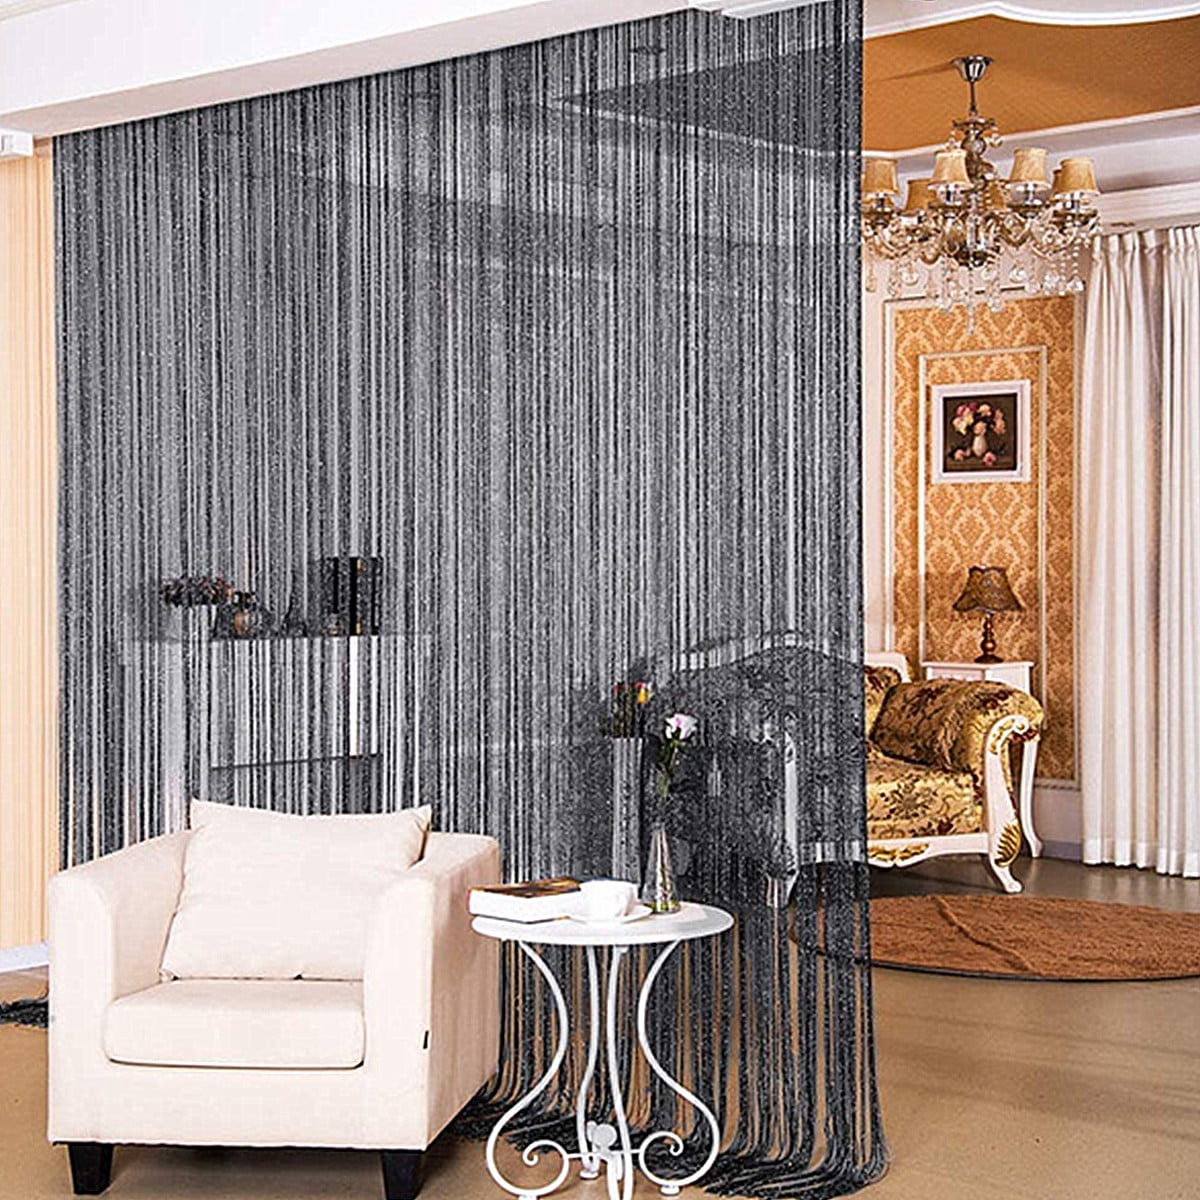 door divider room screen wall decor 40x110" String Curtain Fringe for window 